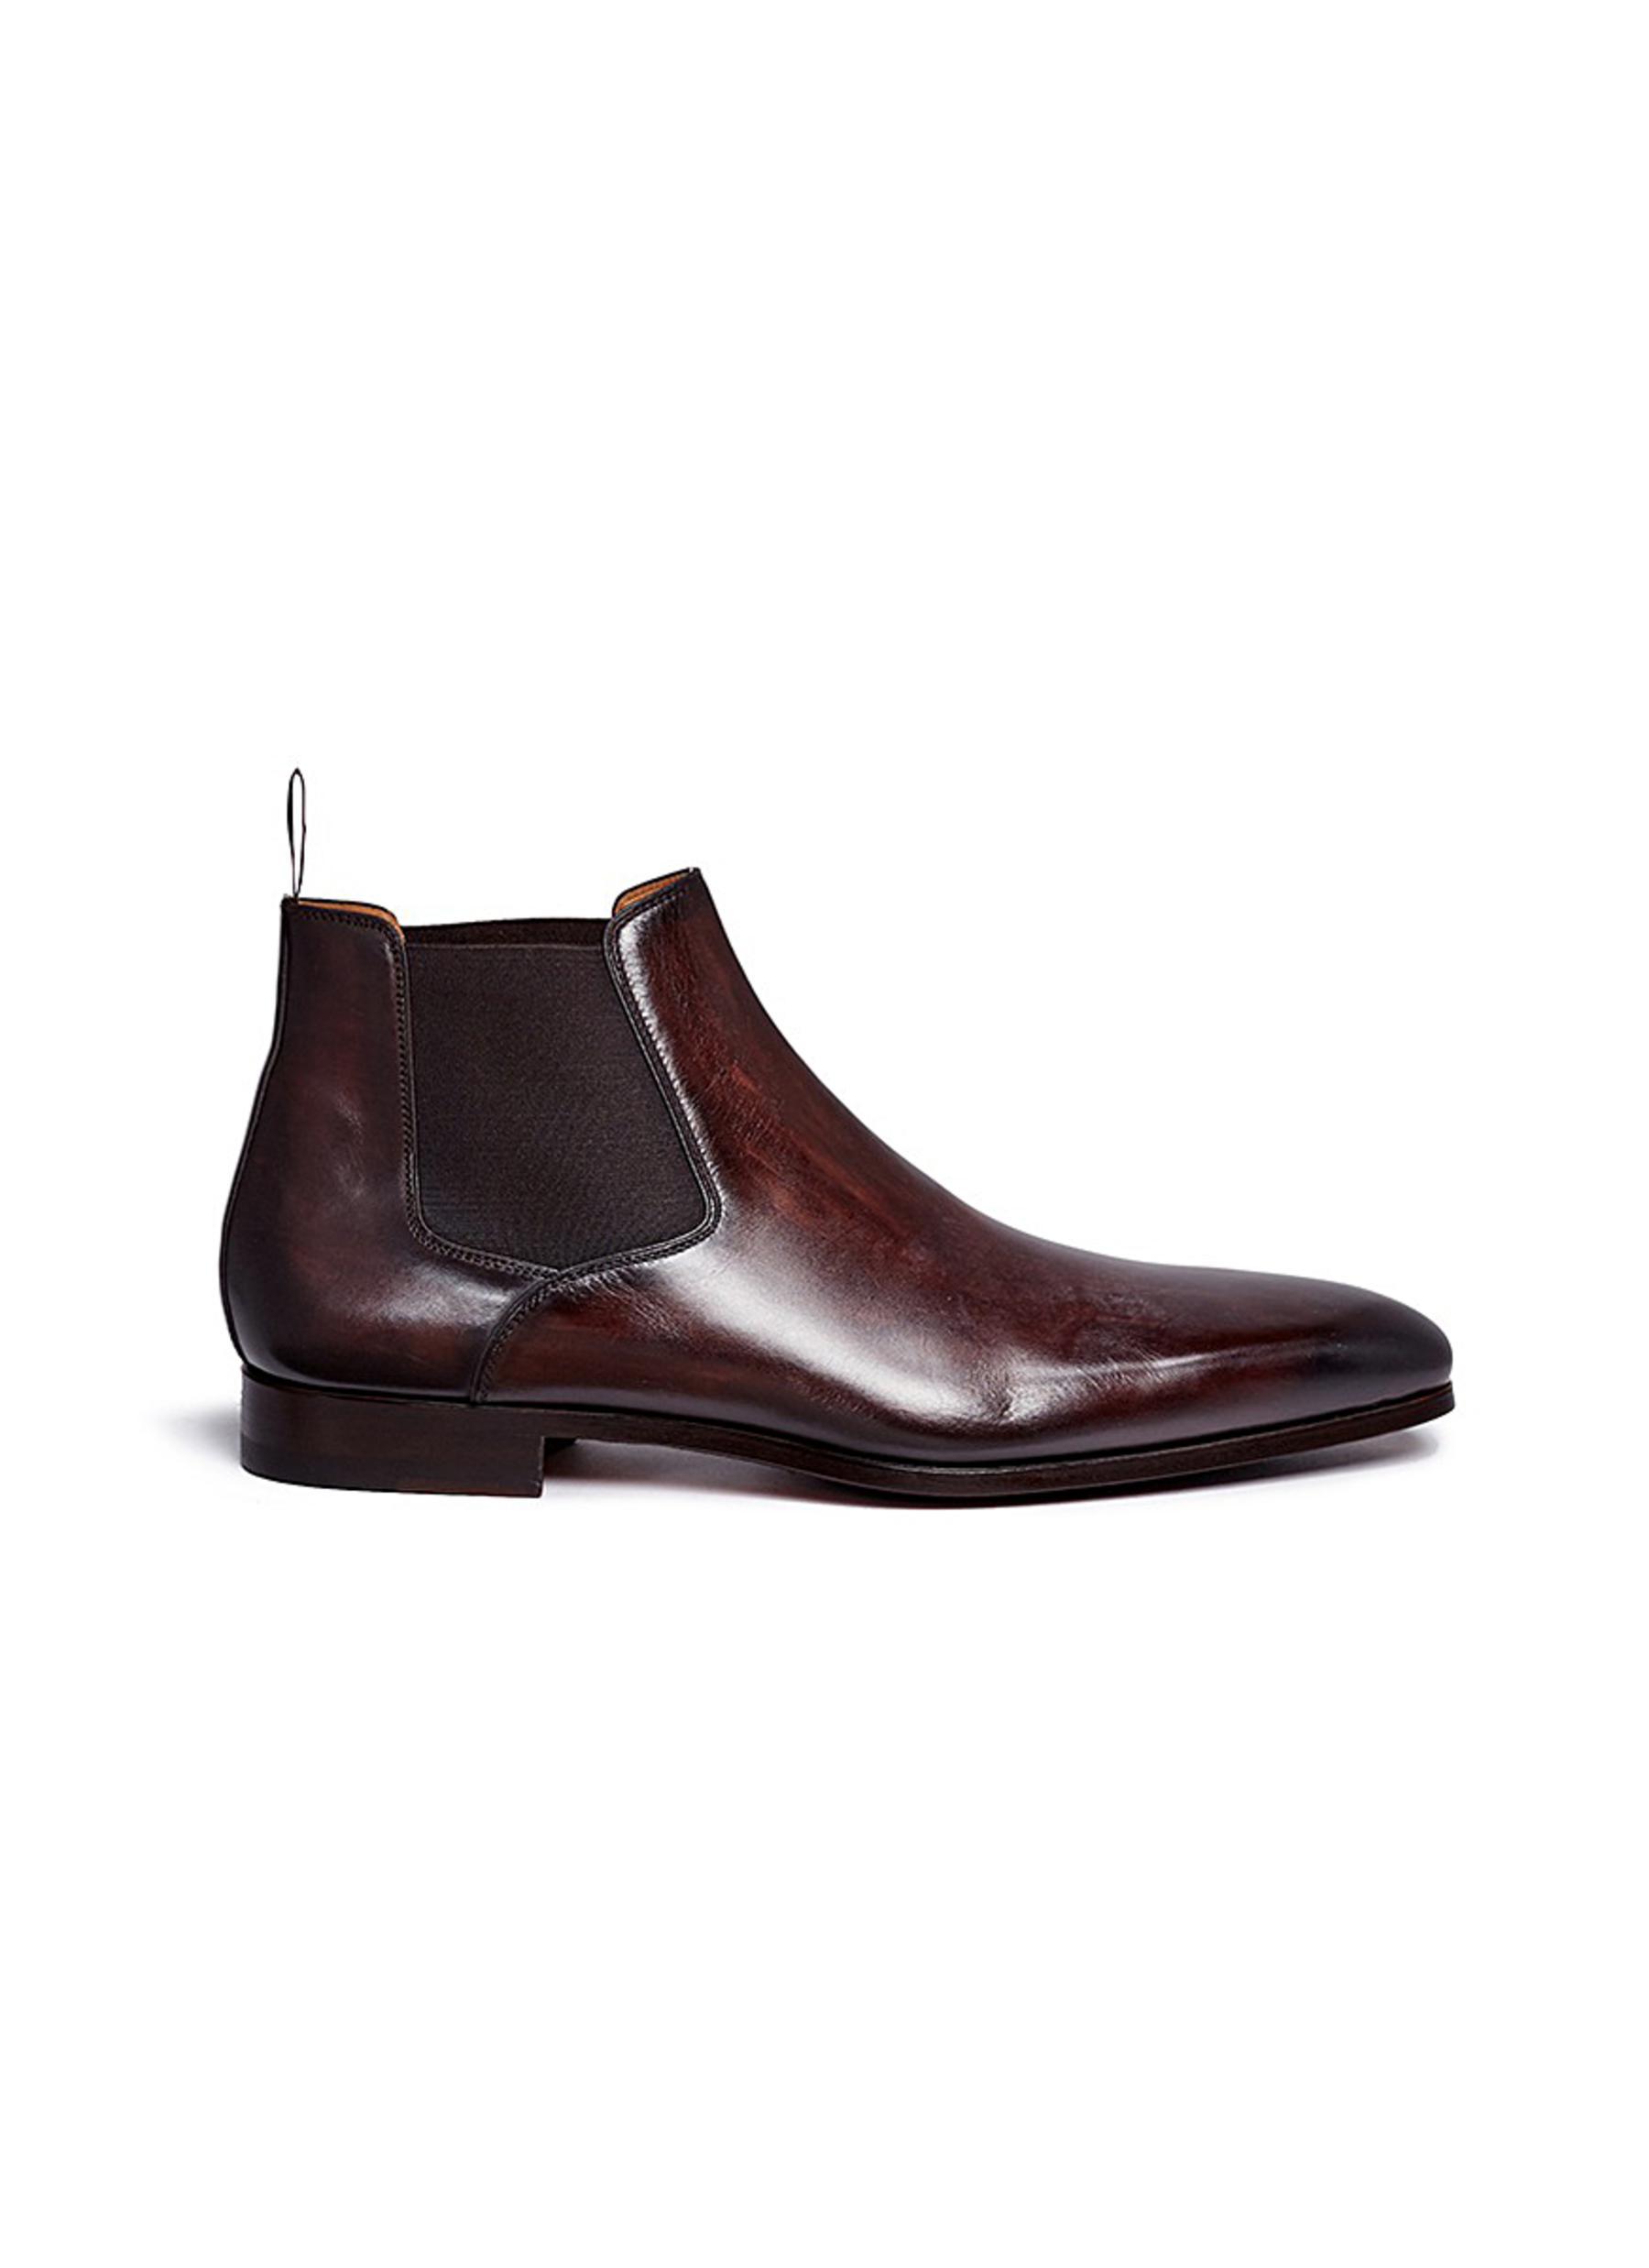 Lyst - Magnanni Shoes Leather Chelsea Boots in Brown for Men